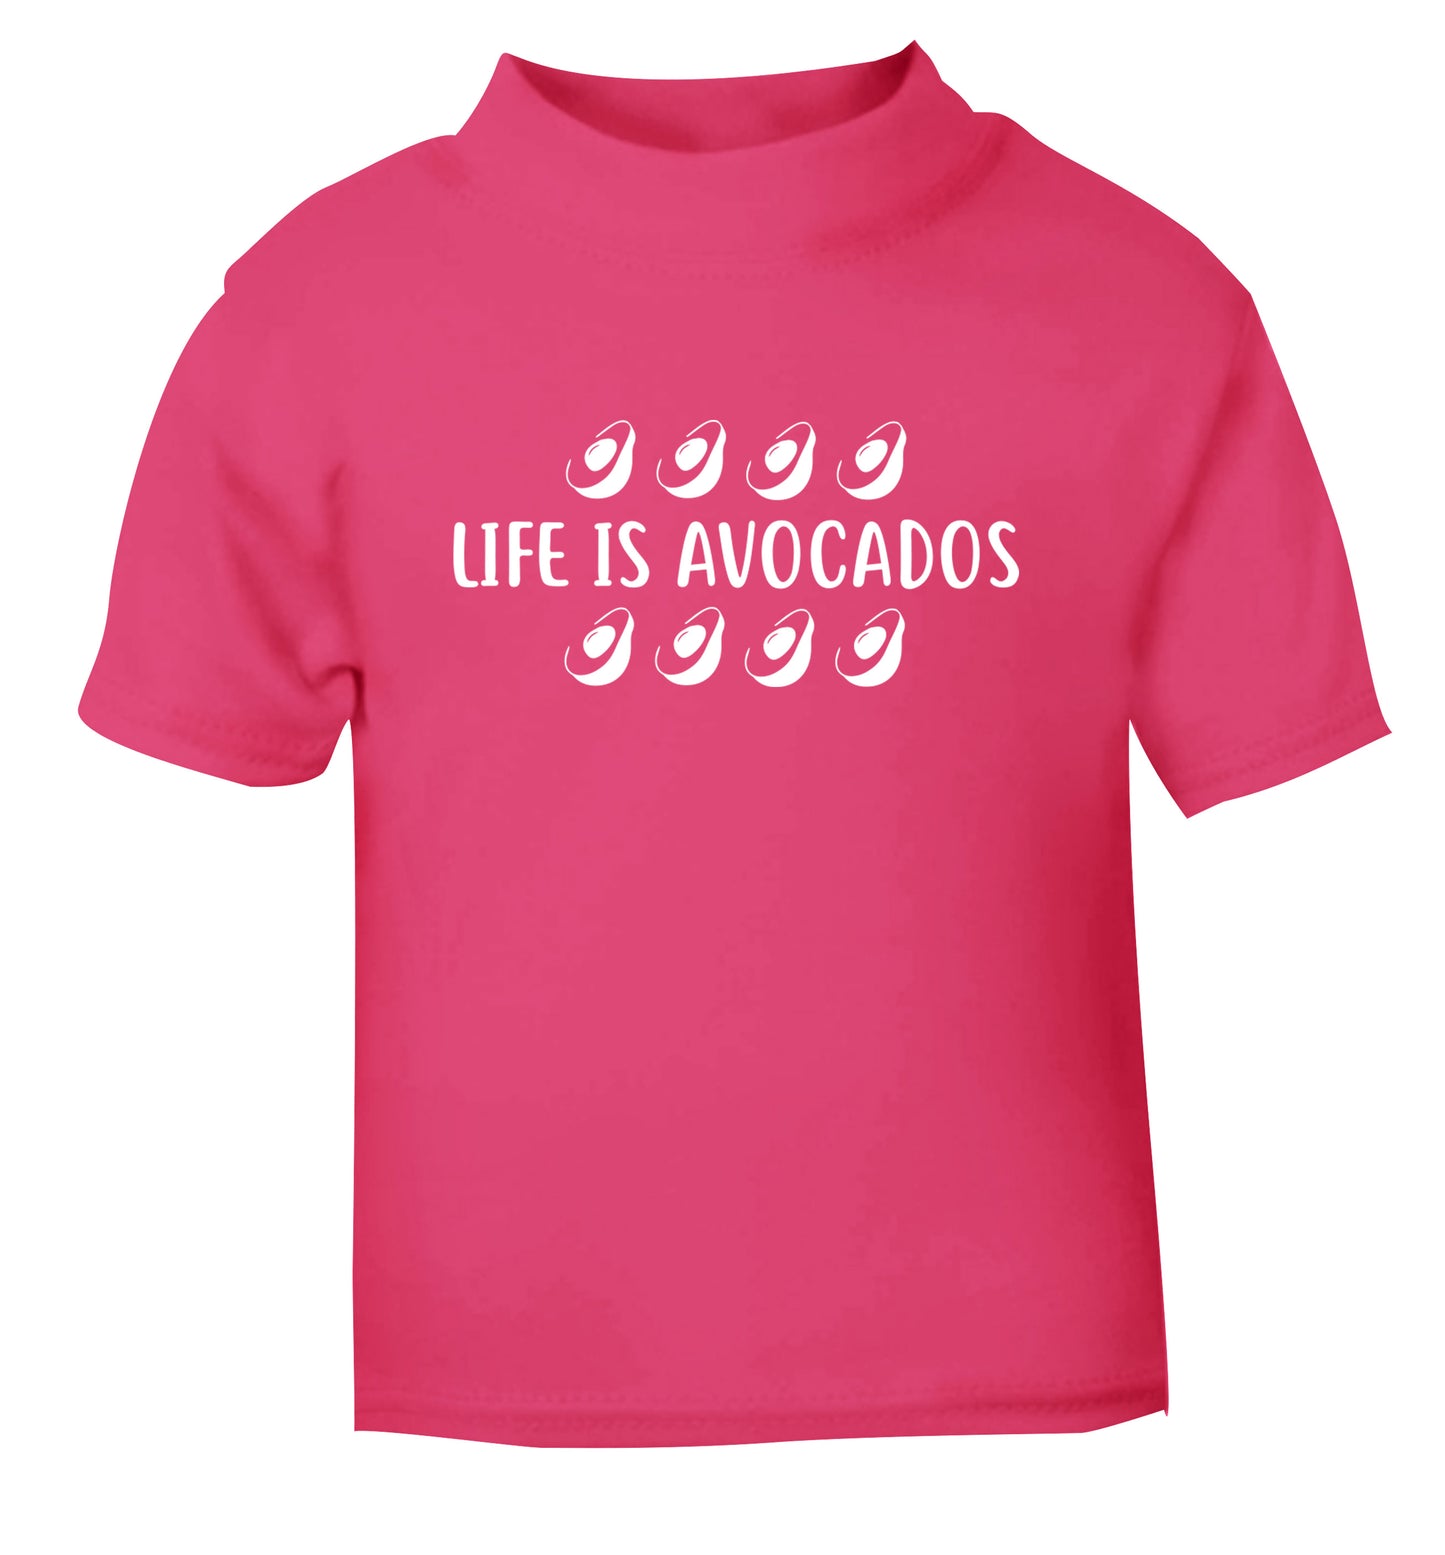 Life is avocados pink Baby Toddler Tshirt 2 Years